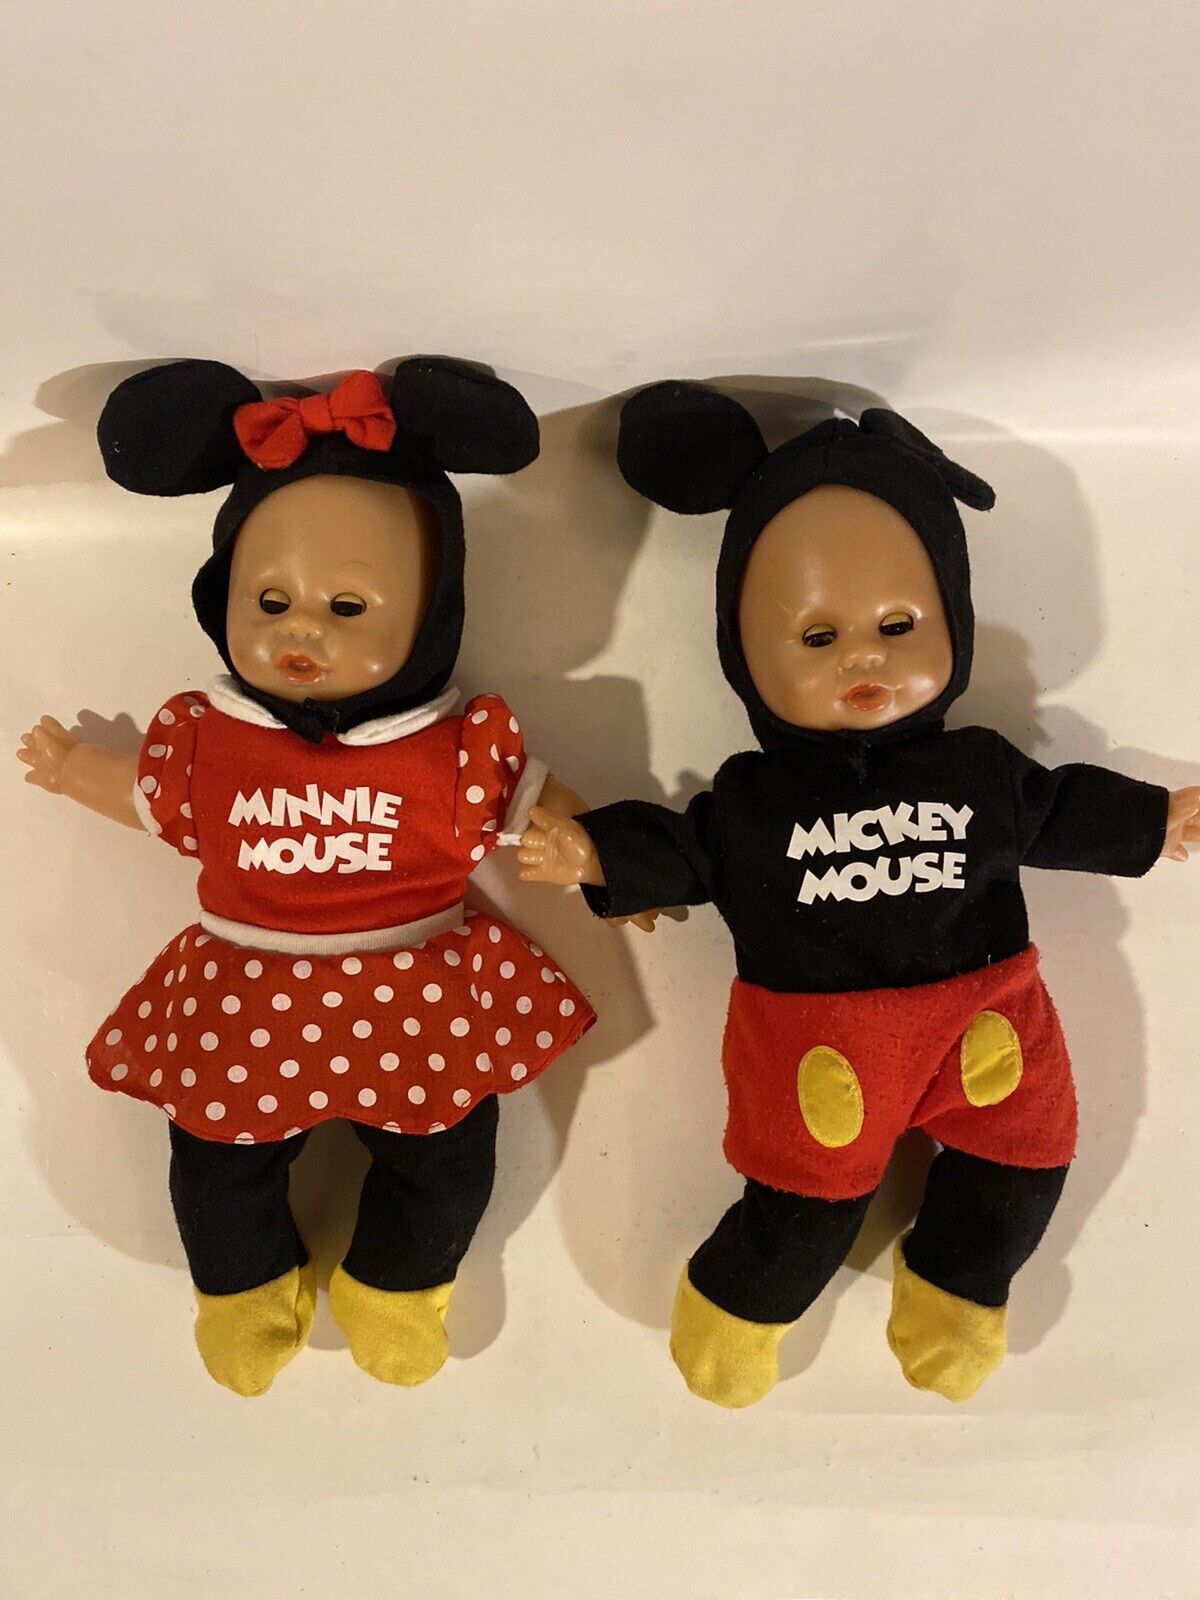 Authentic 1990s vintage Disney Remco?- Mickey And Minnie Mouse plush baby dolls